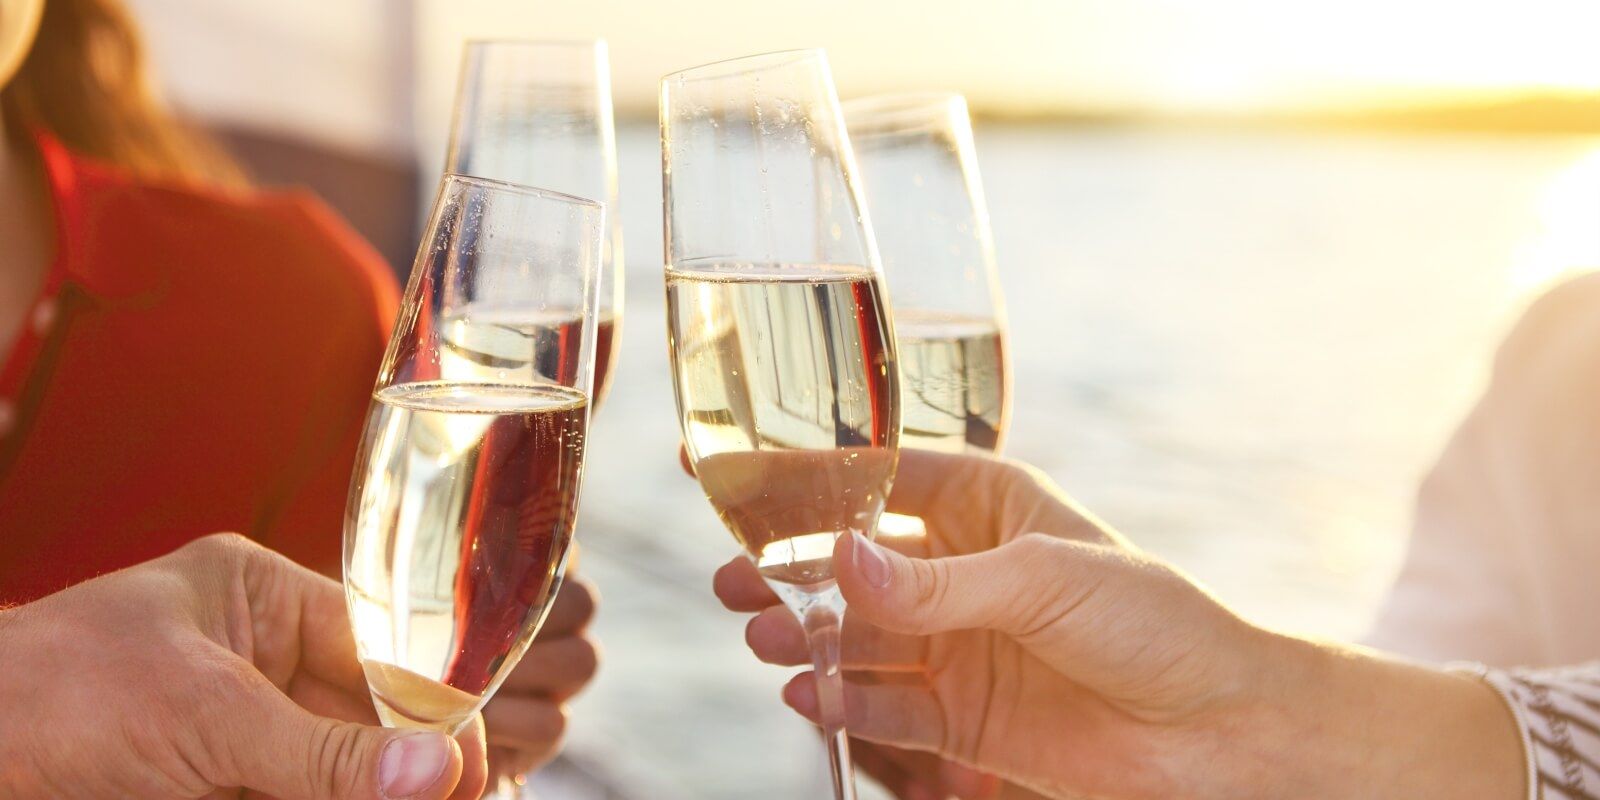 https://www.talamare.com/medias/Cocktail with champagne flutes and appetizers for a corporate team building event onboard a charter yacht